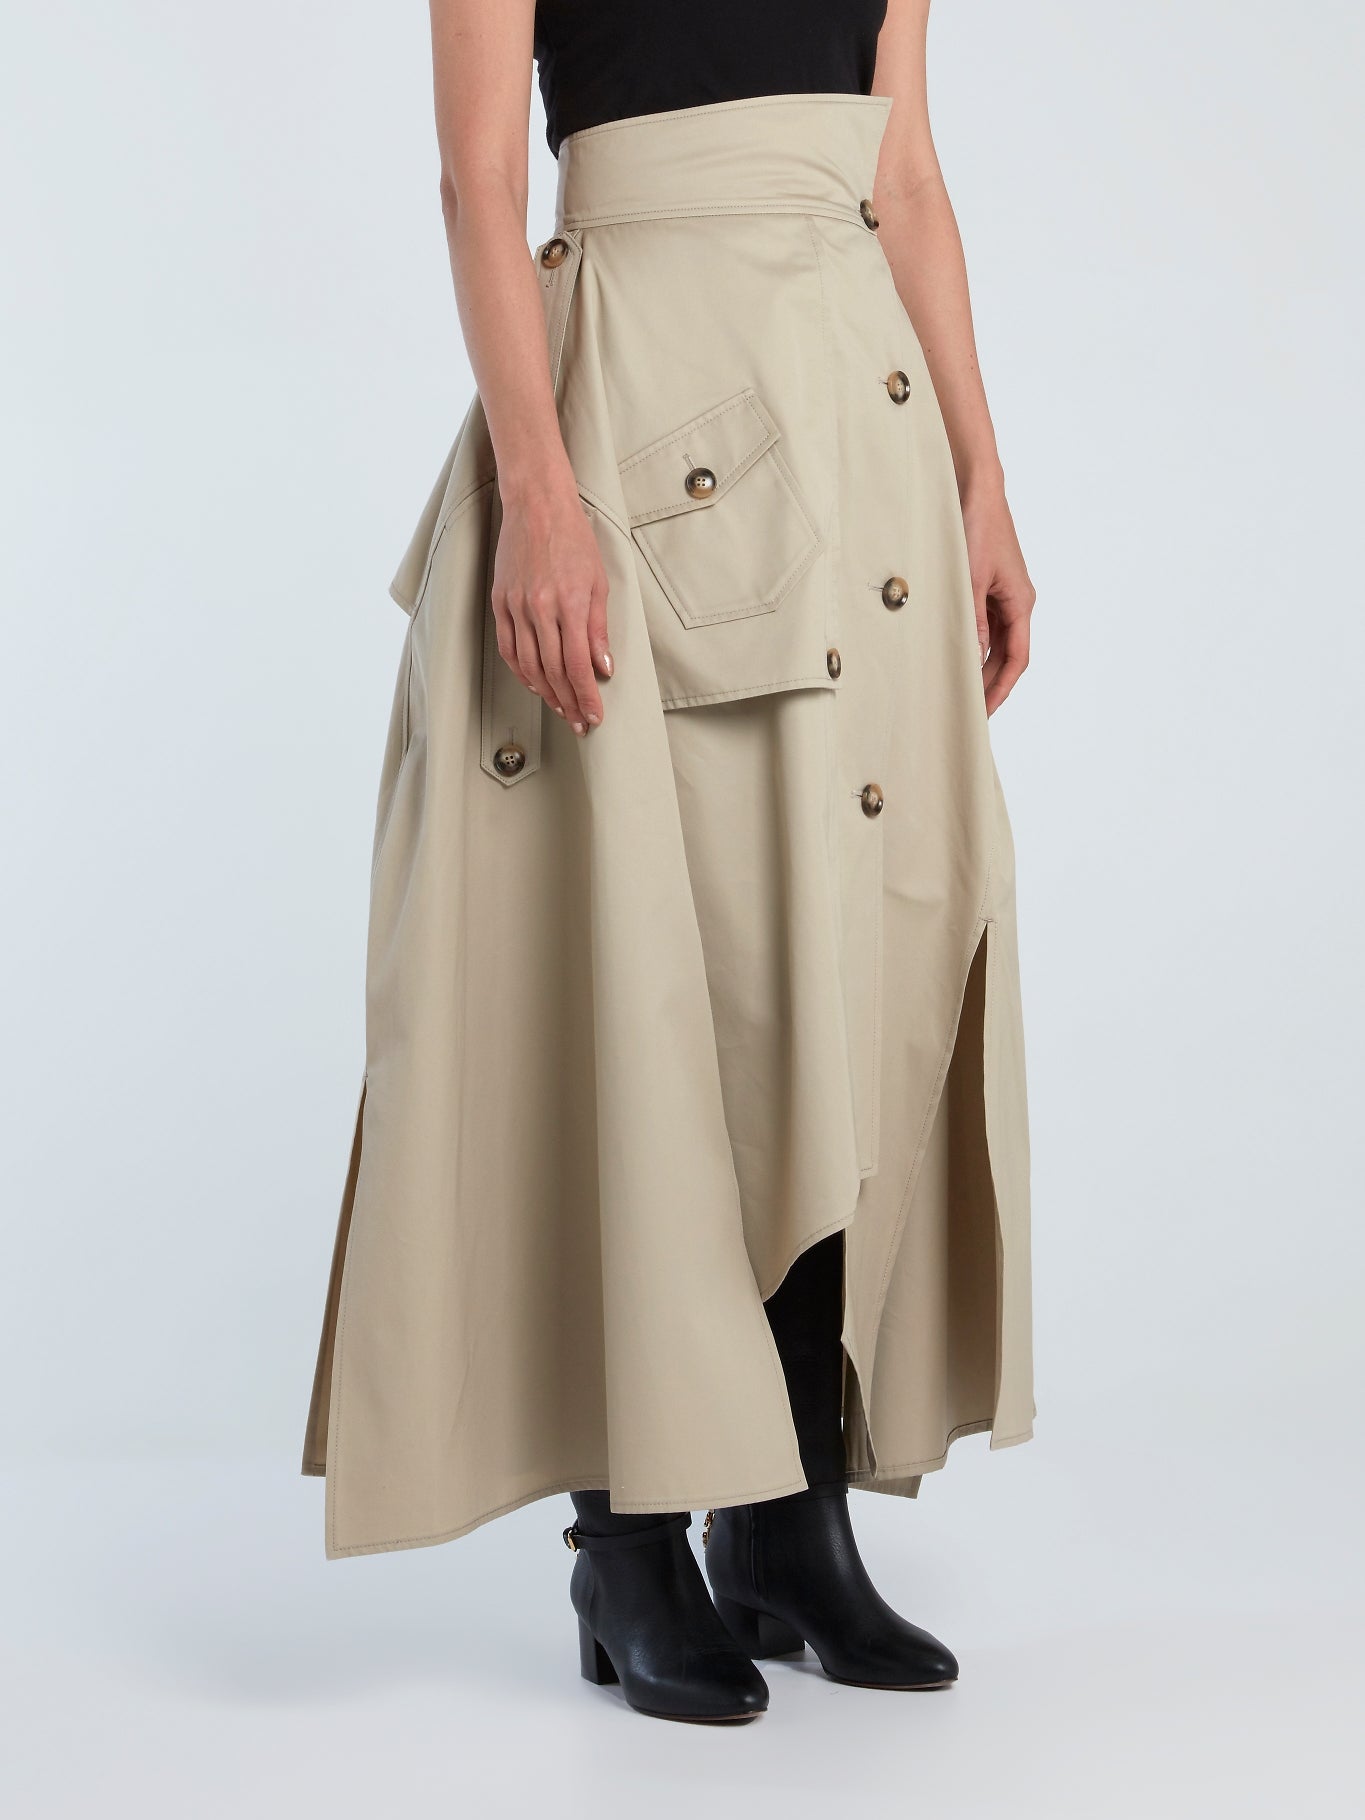 Reconstructed Trench Form Maxi Skirt – Store Maison-B-More Global